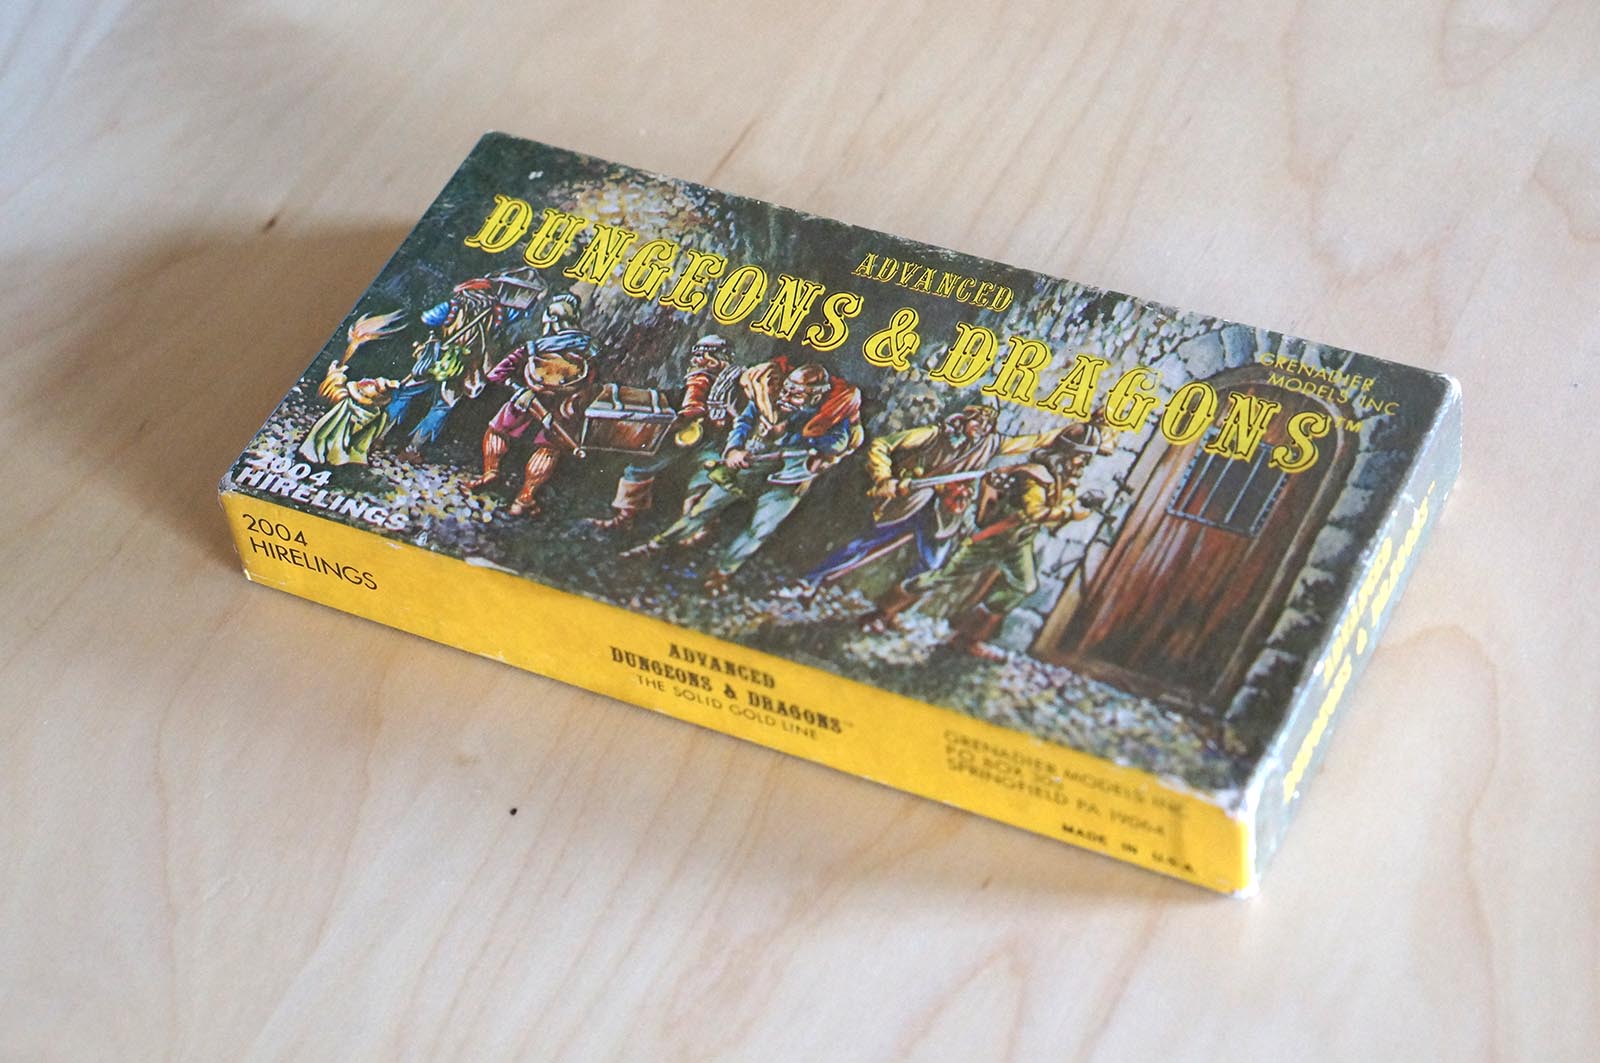 Advanced Dungeons & Dragons Miniatures